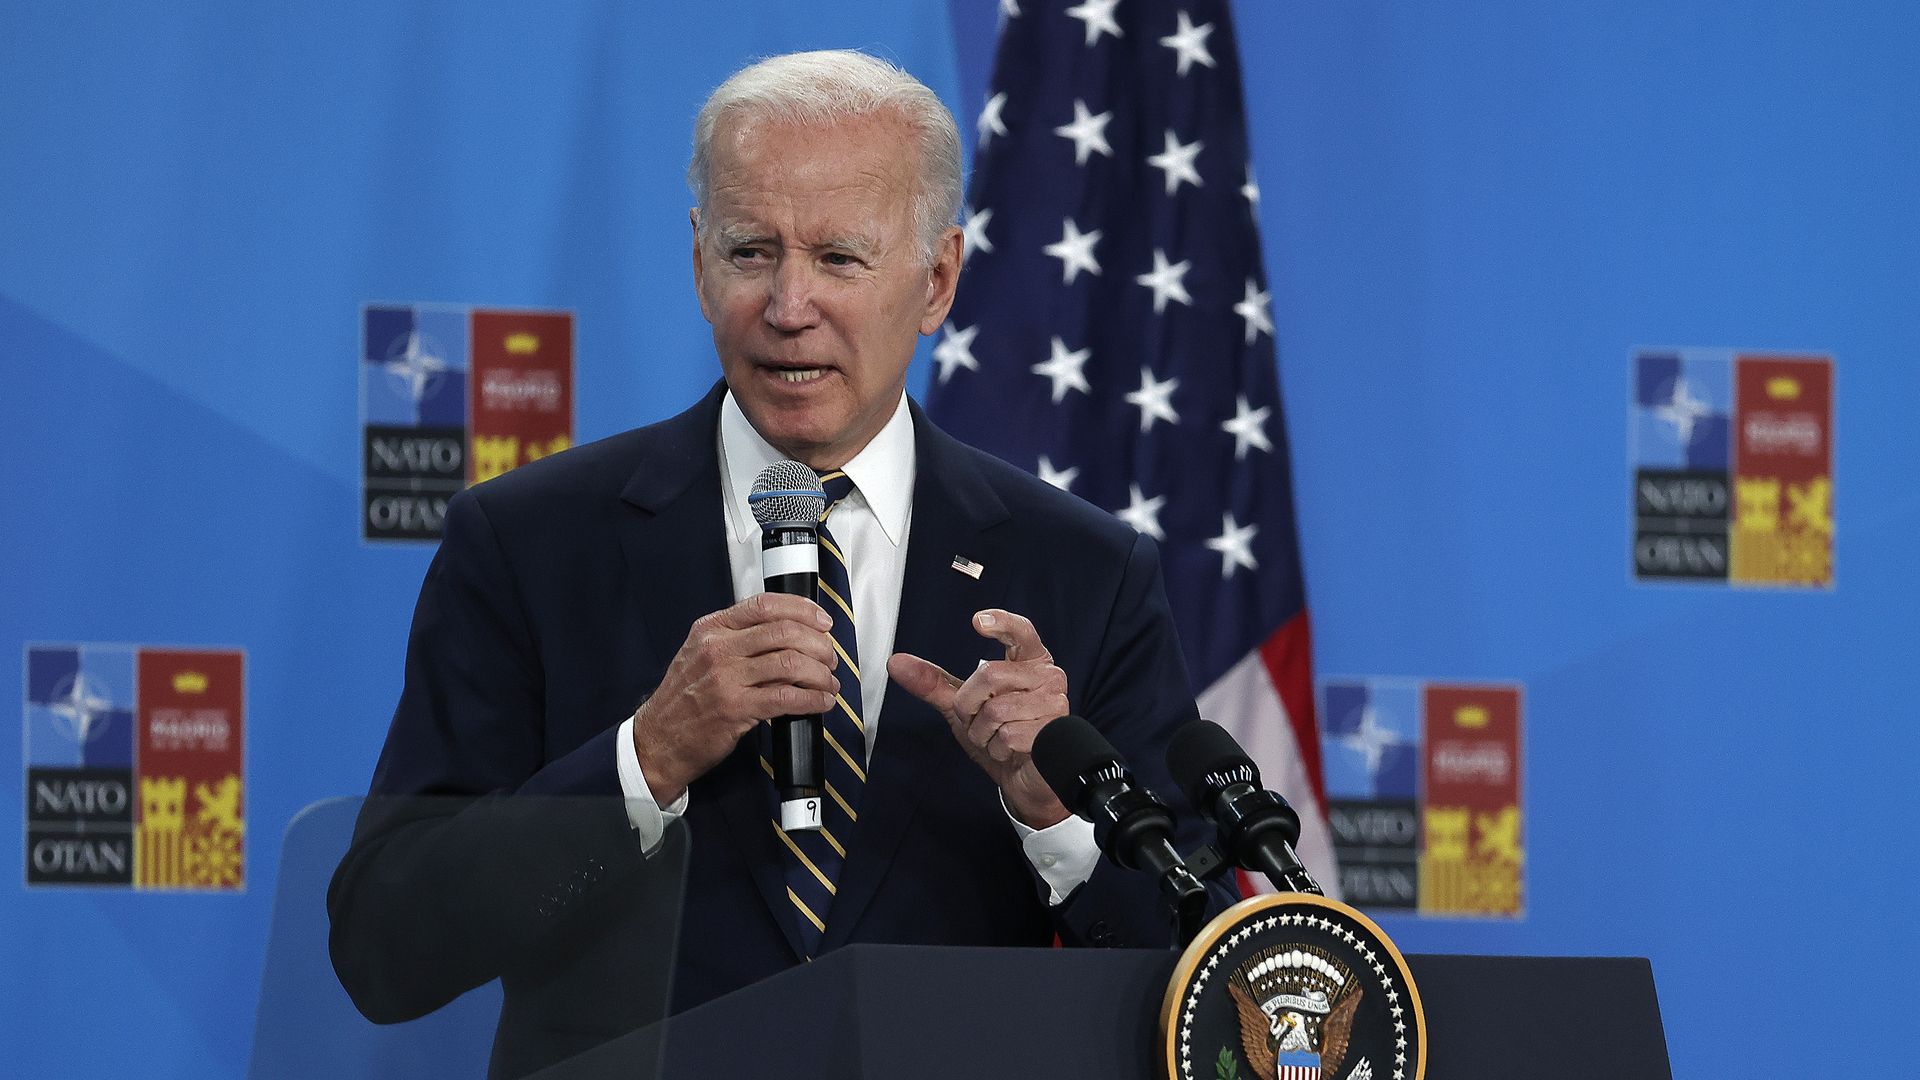 President Joe Biden holds a press conference on the last day of the NATO Summit at the IFEMA Convention Center, in Madrid, Spain on June 30, 2022.